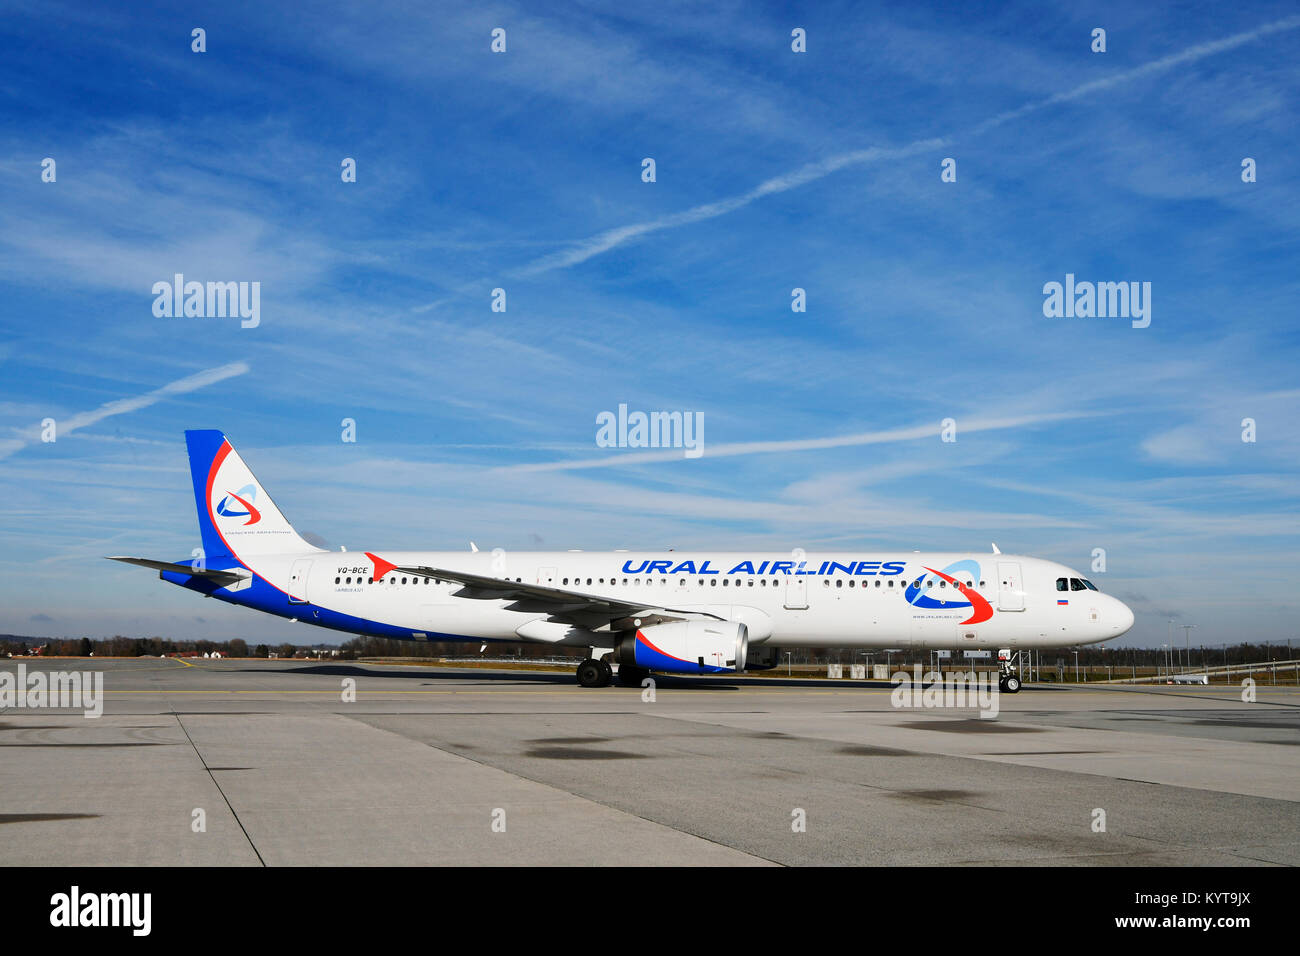 Ural Airlines, A321, aircraft, airplane, plane, airlines, airways, roll, in, out,  Munich Airport, Stock Photo